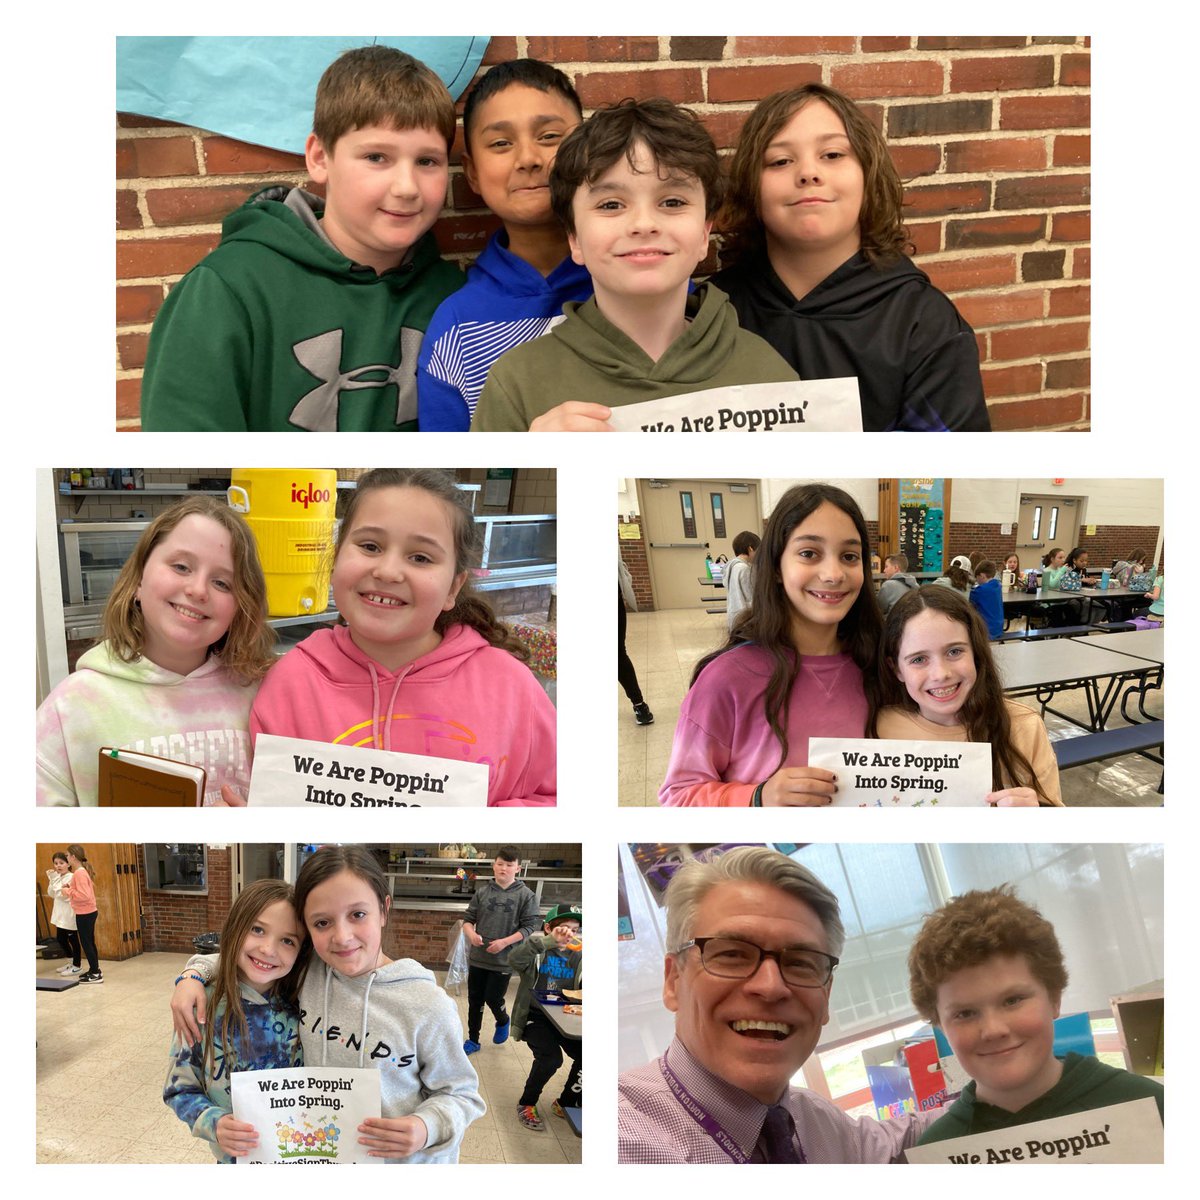 On this first #PositiveSignThursday of Spring We celebrate how our amazing students Are Poppin’ Into Spring with incredible smiles and tremendous enthusiasm, energy and effort, which we greatly appreciate! #HAYNation